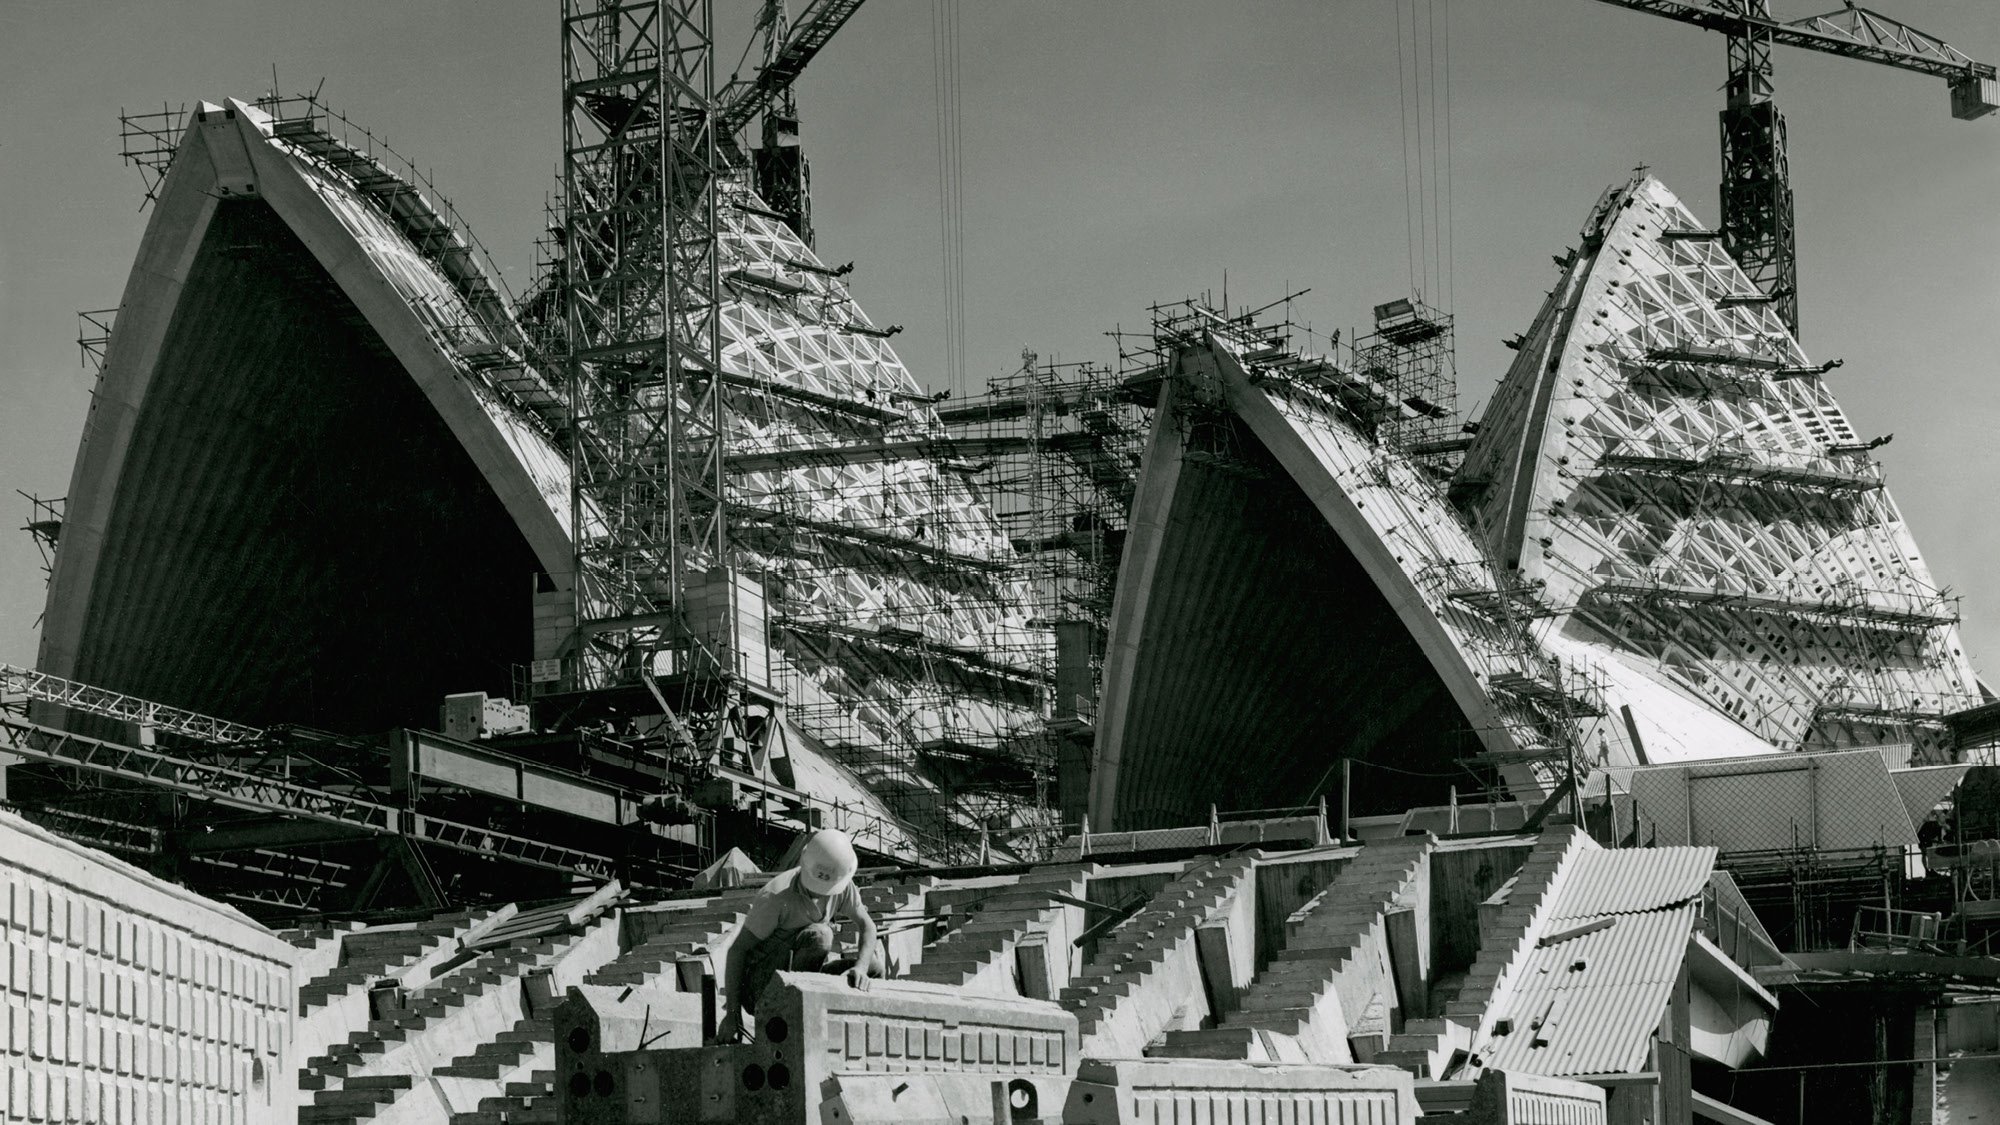 A black and white photograph of the roof sails at the Sydney Opera House during construction